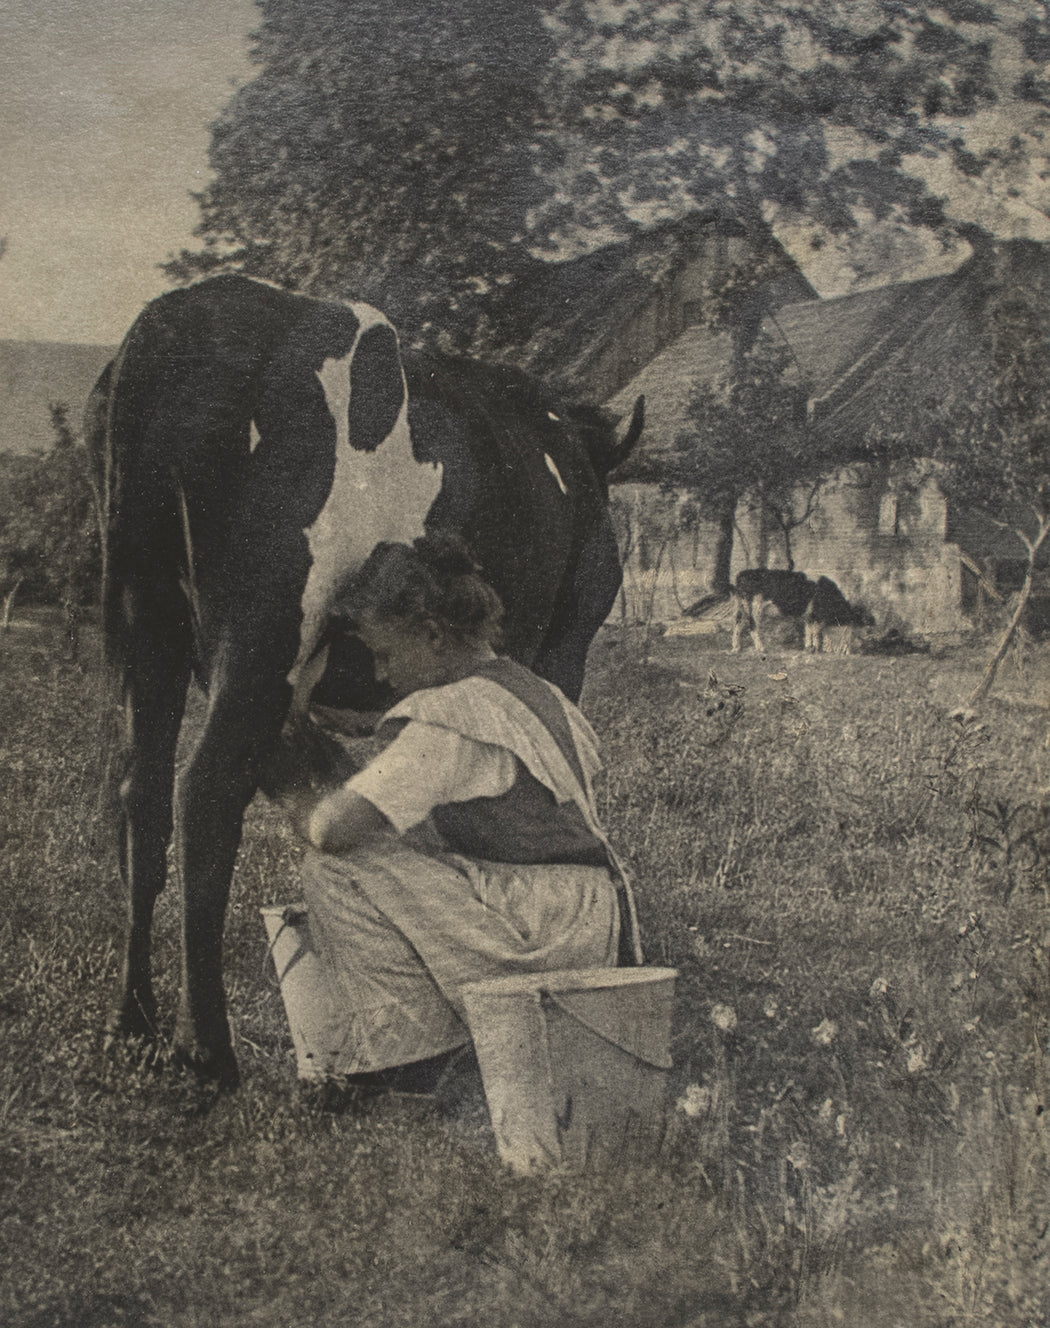 Untitled (portrait of a girl milking a cow)